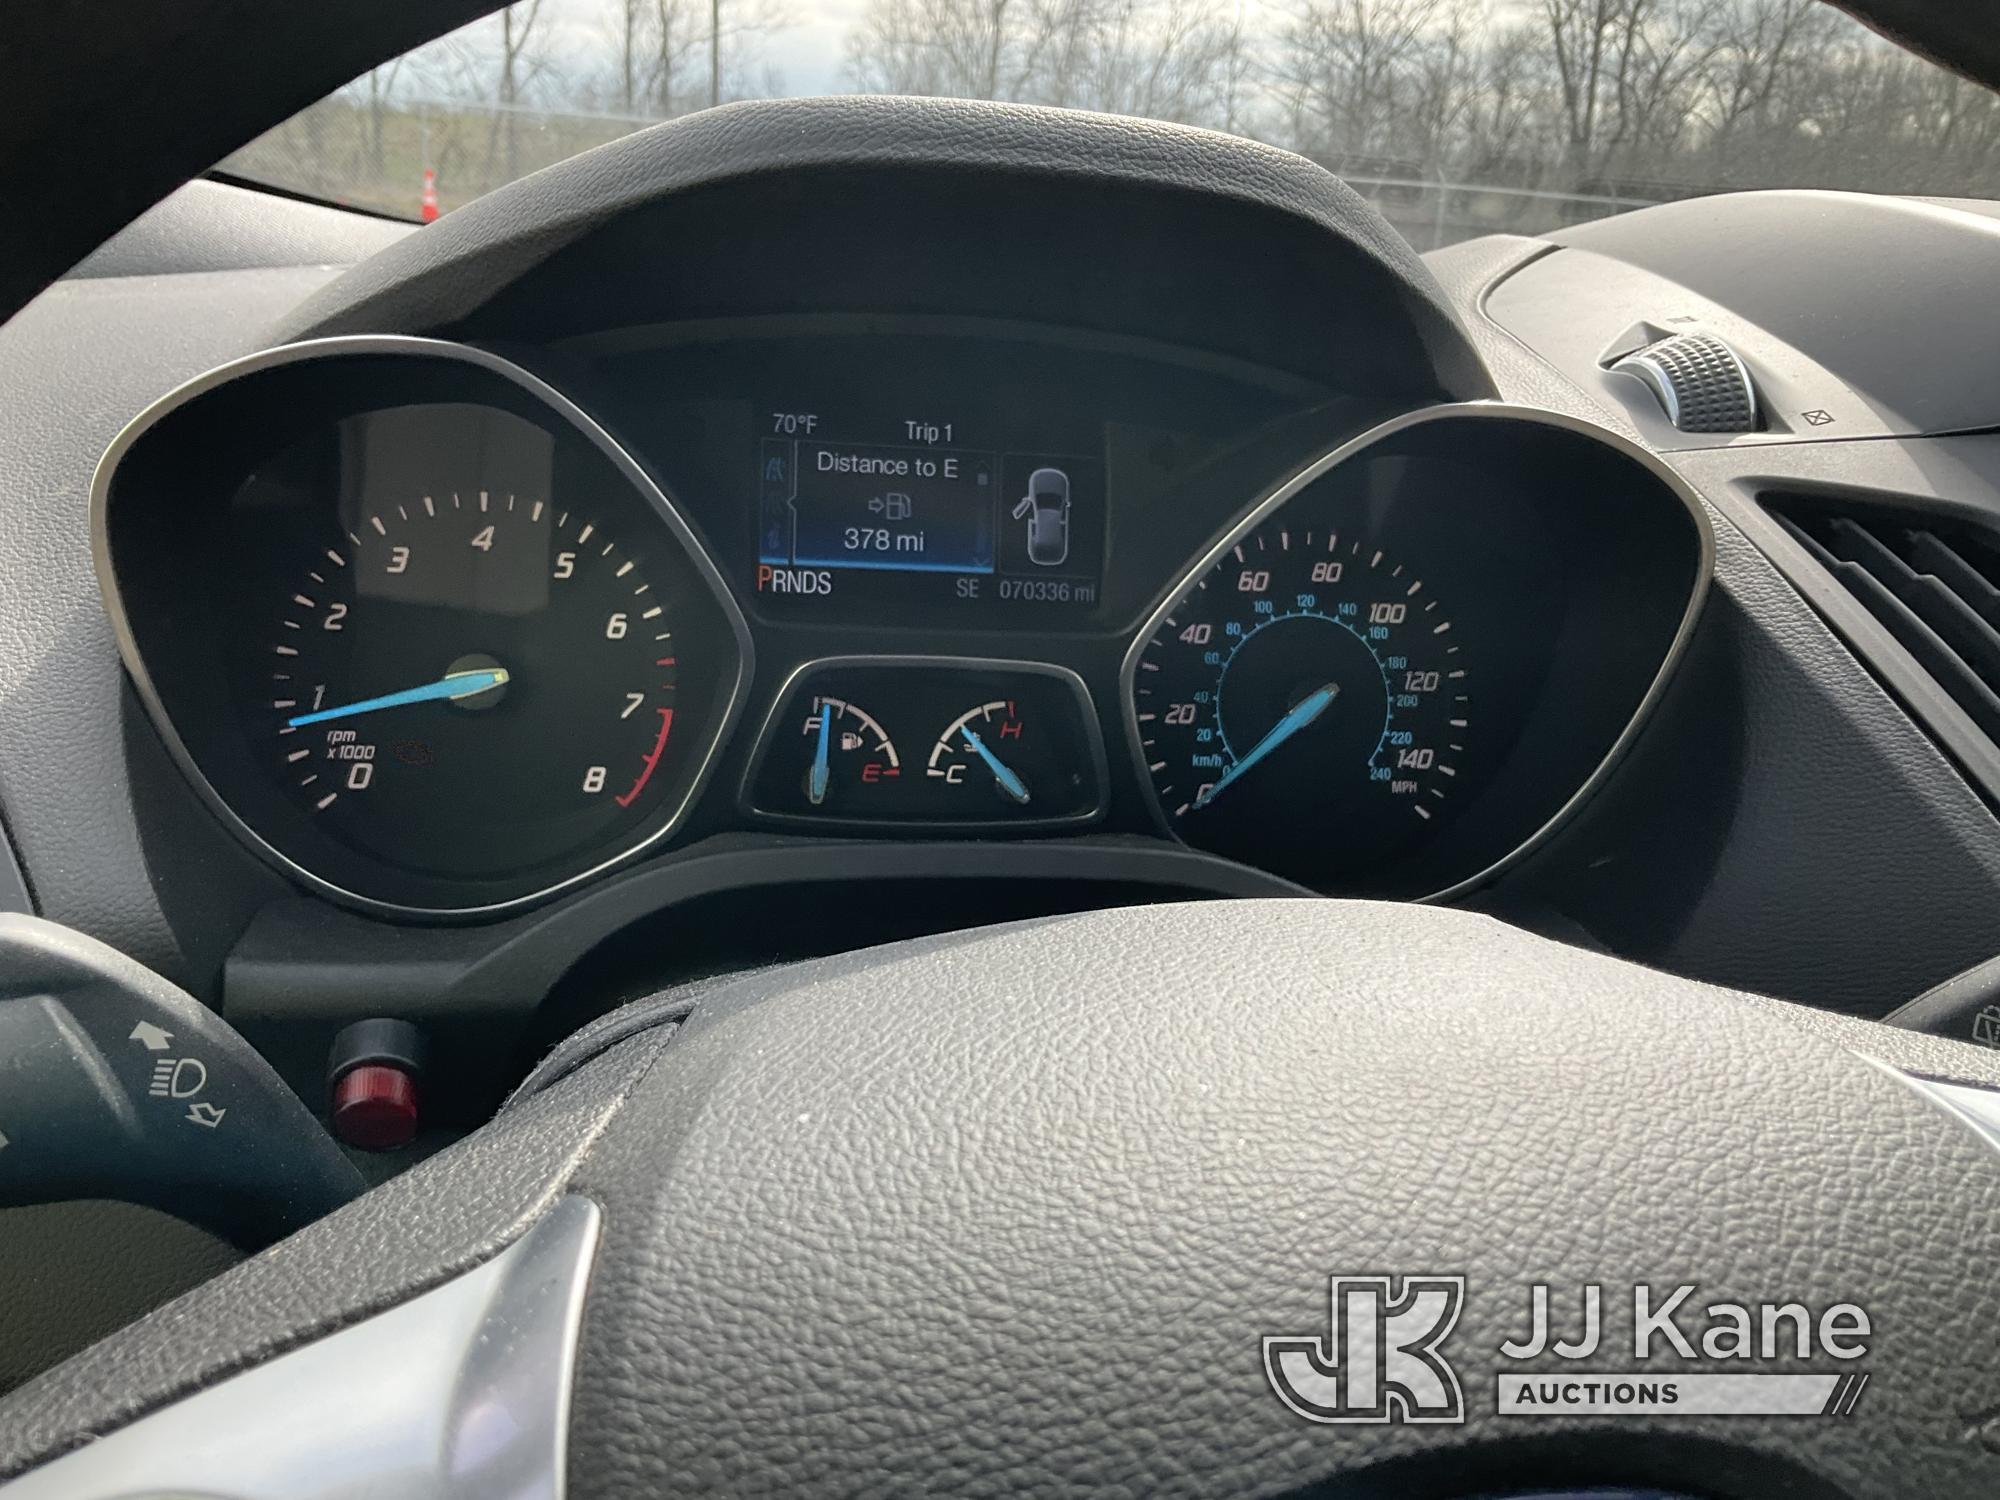 (Verona, KY) 2015 Ford Escape 4x4 4-Door Sport Utility Vehicle Runs & Moves ) (Check Engine Light On